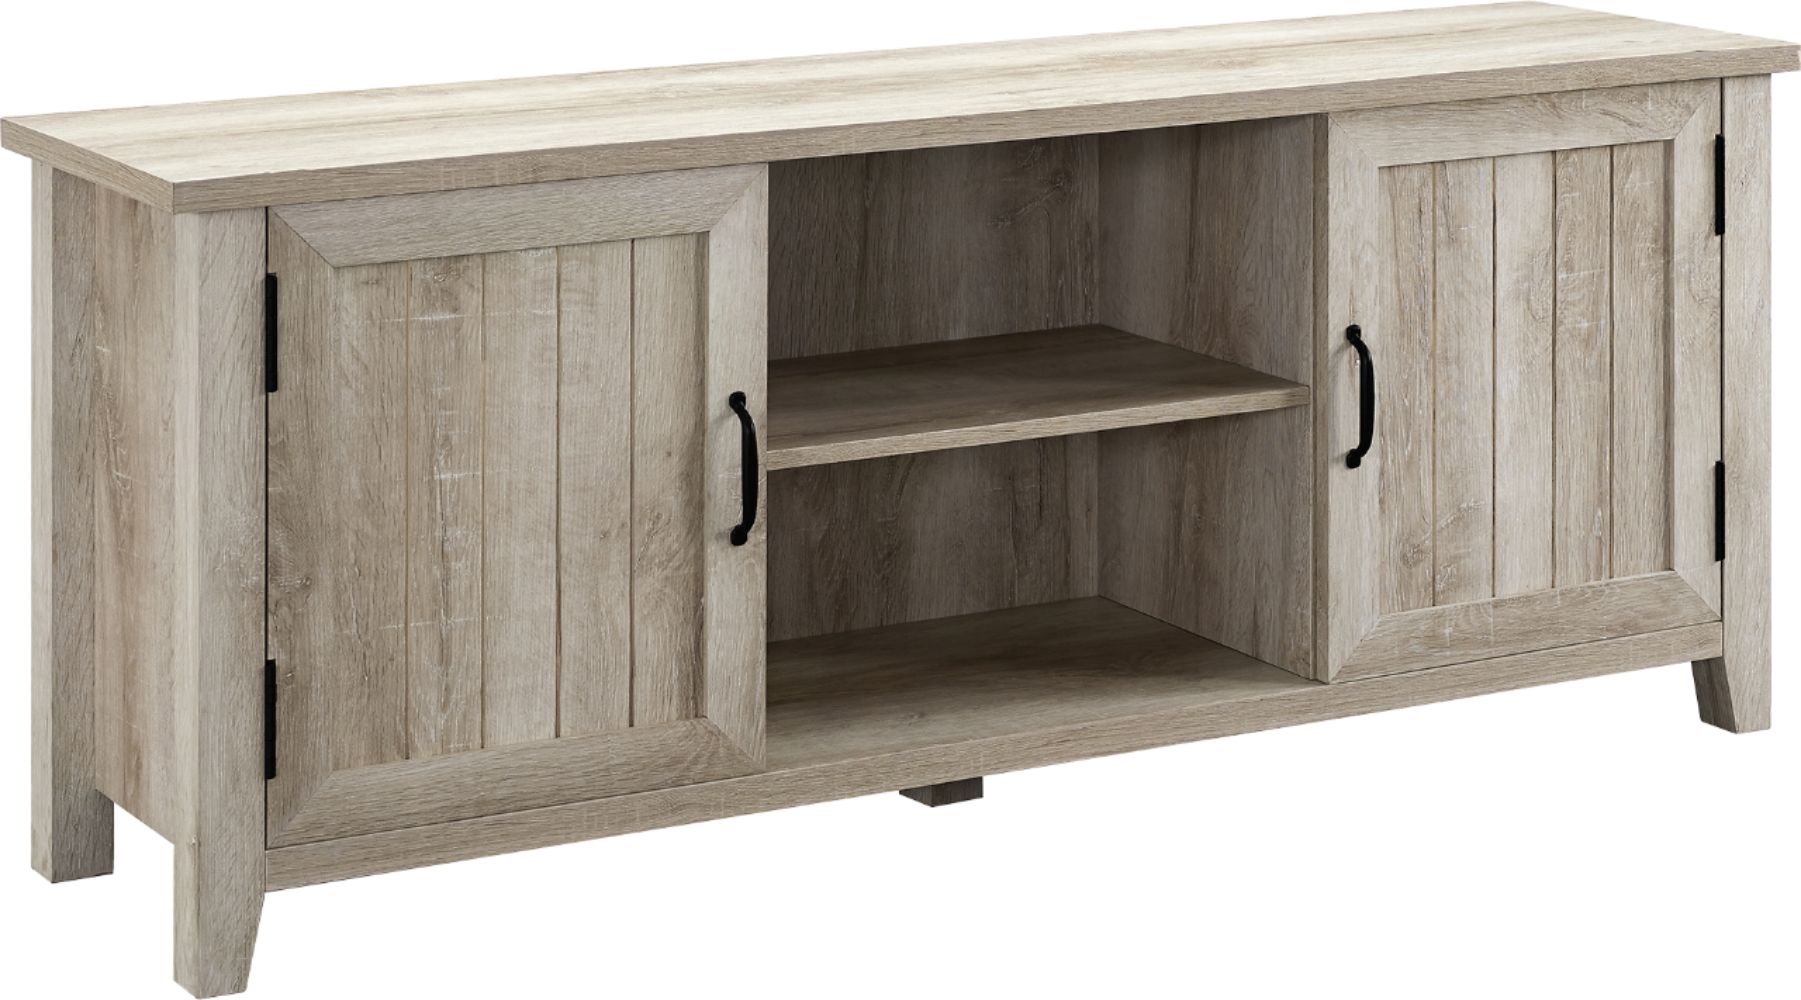 Angle View: Simpli Home - Artisan TV Cabinet for Most TVs Up to 58" - Natural Aged Brown